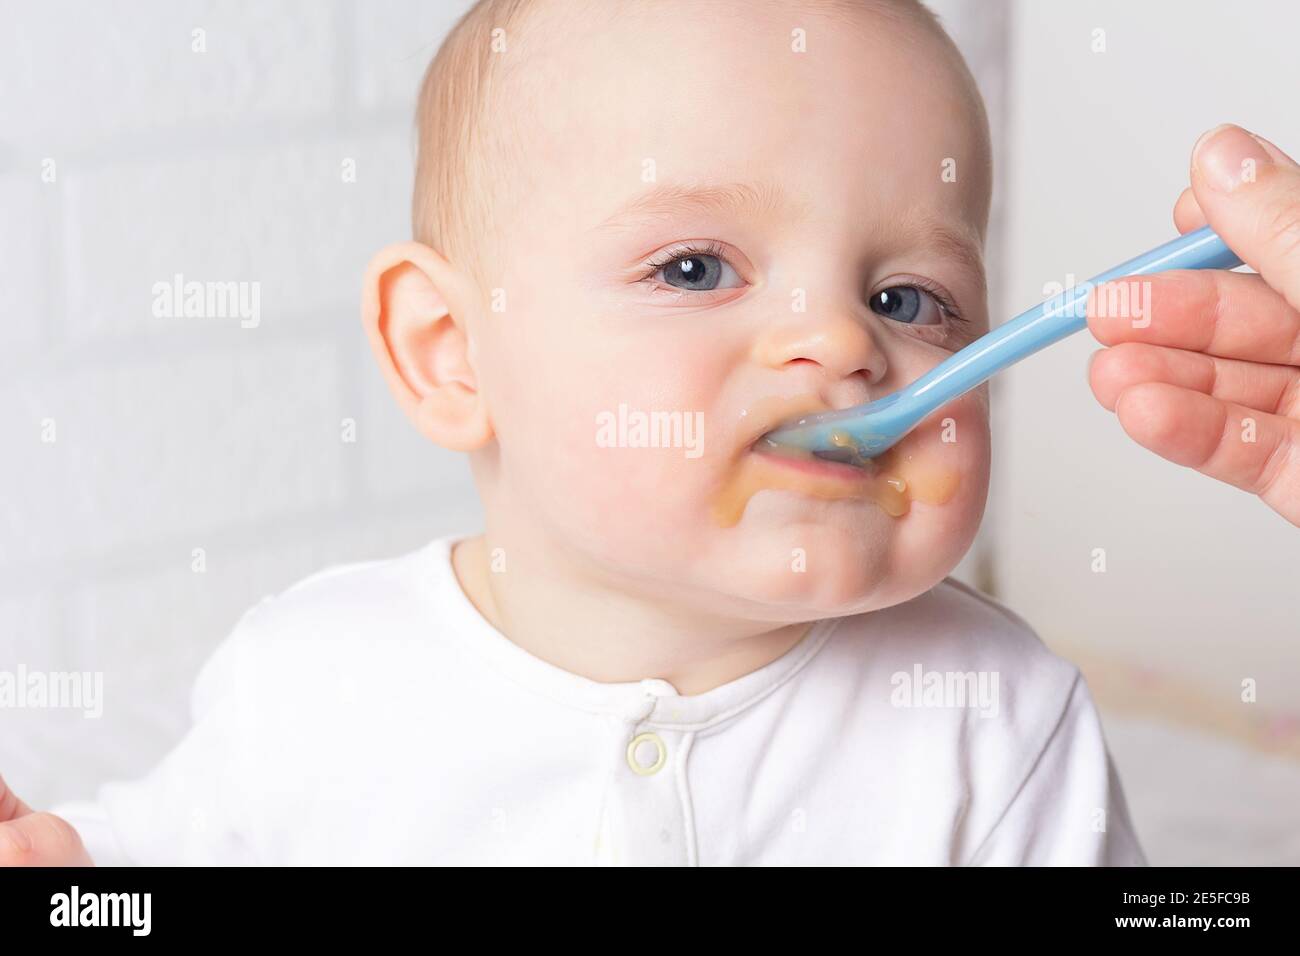 https://c8.alamy.com/comp/2E5FC9B/mother-feeding-baby-with-blue-baby-spoon-first-baby-fruit-puree-close-up-photo-of-caucasian-baby-boy-child-learning-to-eat-2E5FC9B.jpg